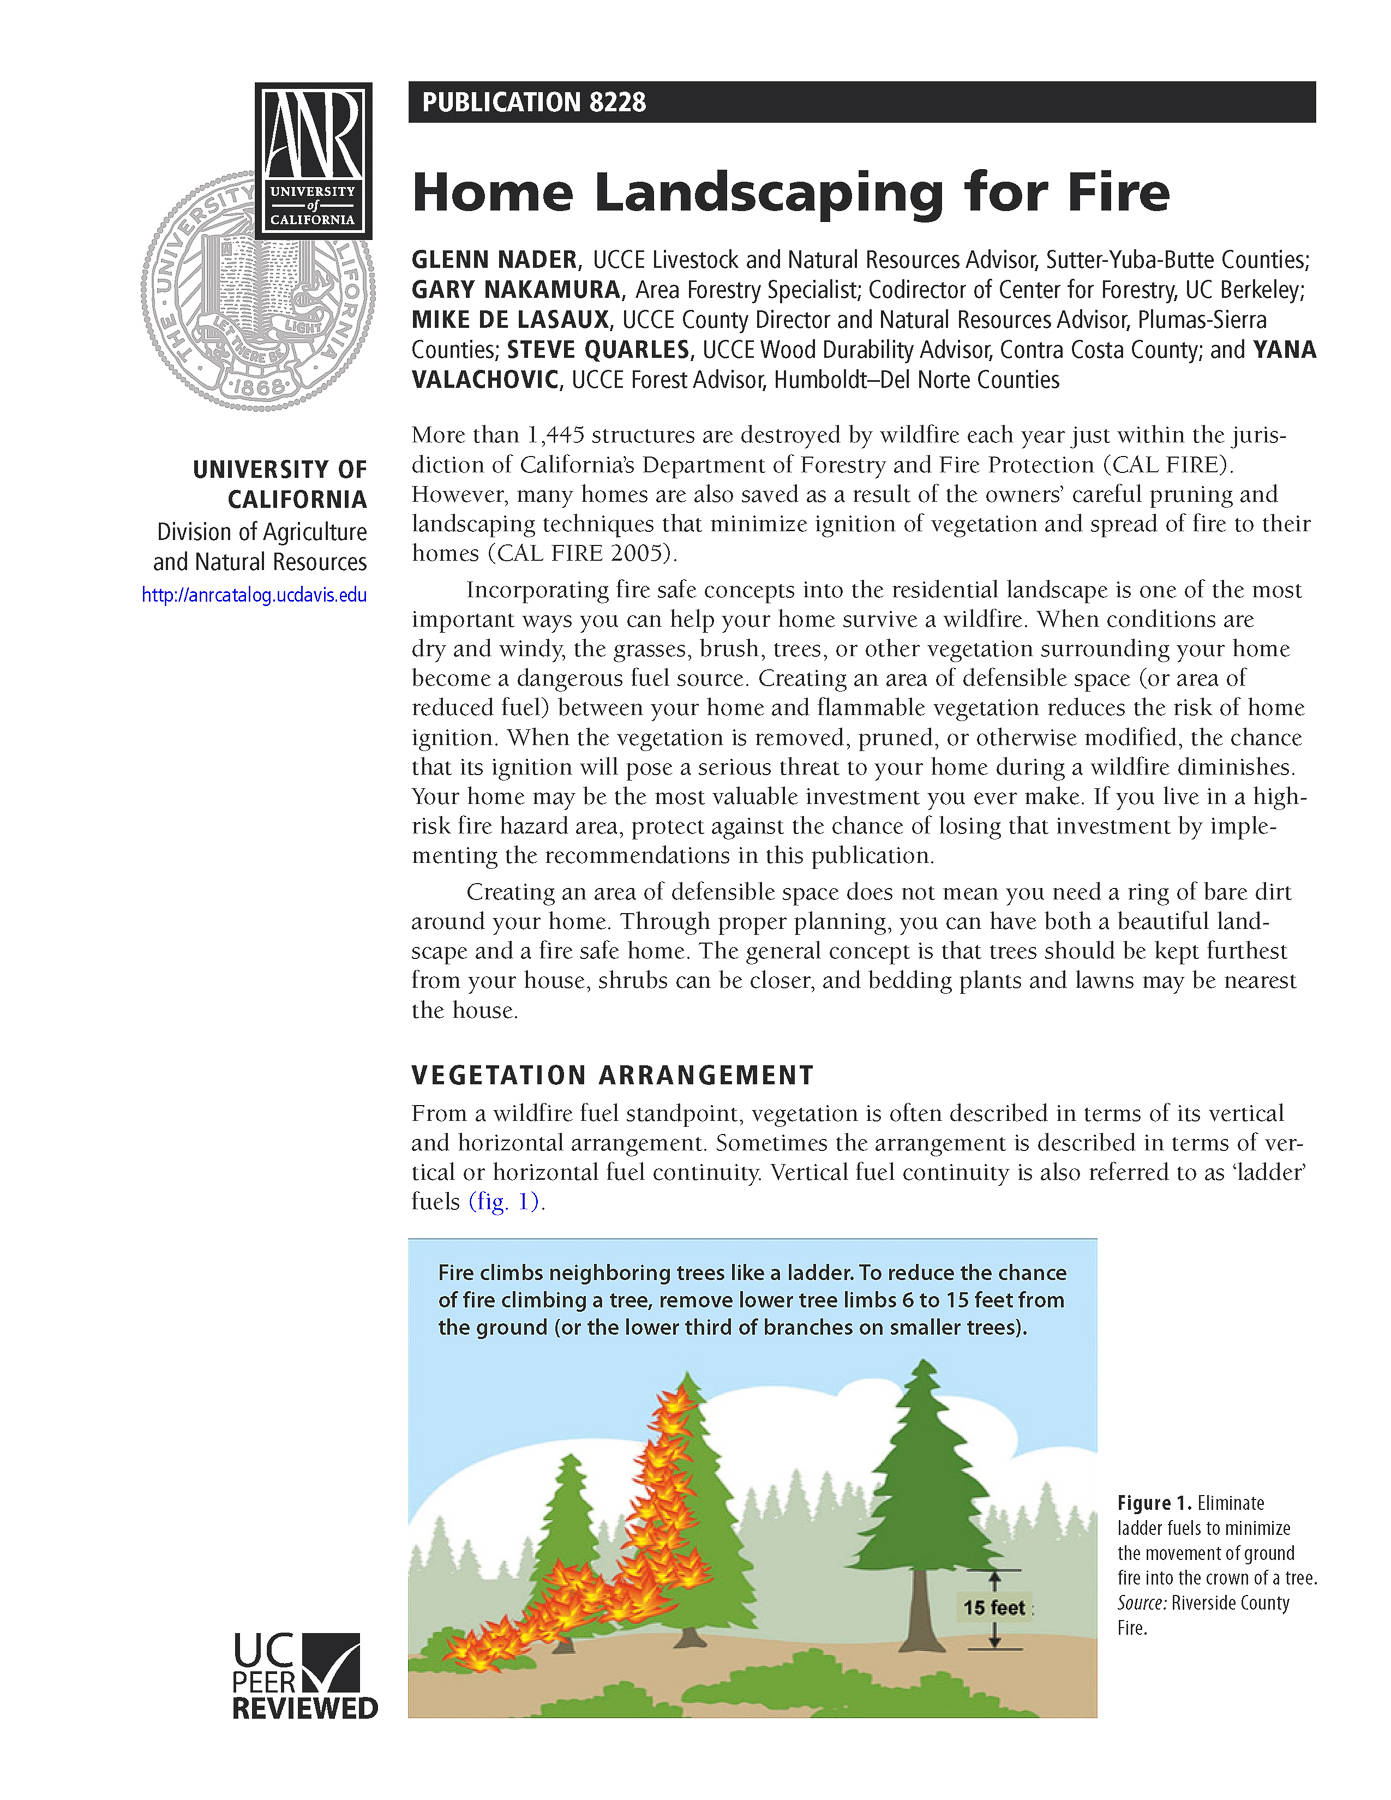 UCCE advisors developed an eight-page electronic publication that helps homeowners manage vegetation within 100 feet of their home and reduce the risk of home loss.